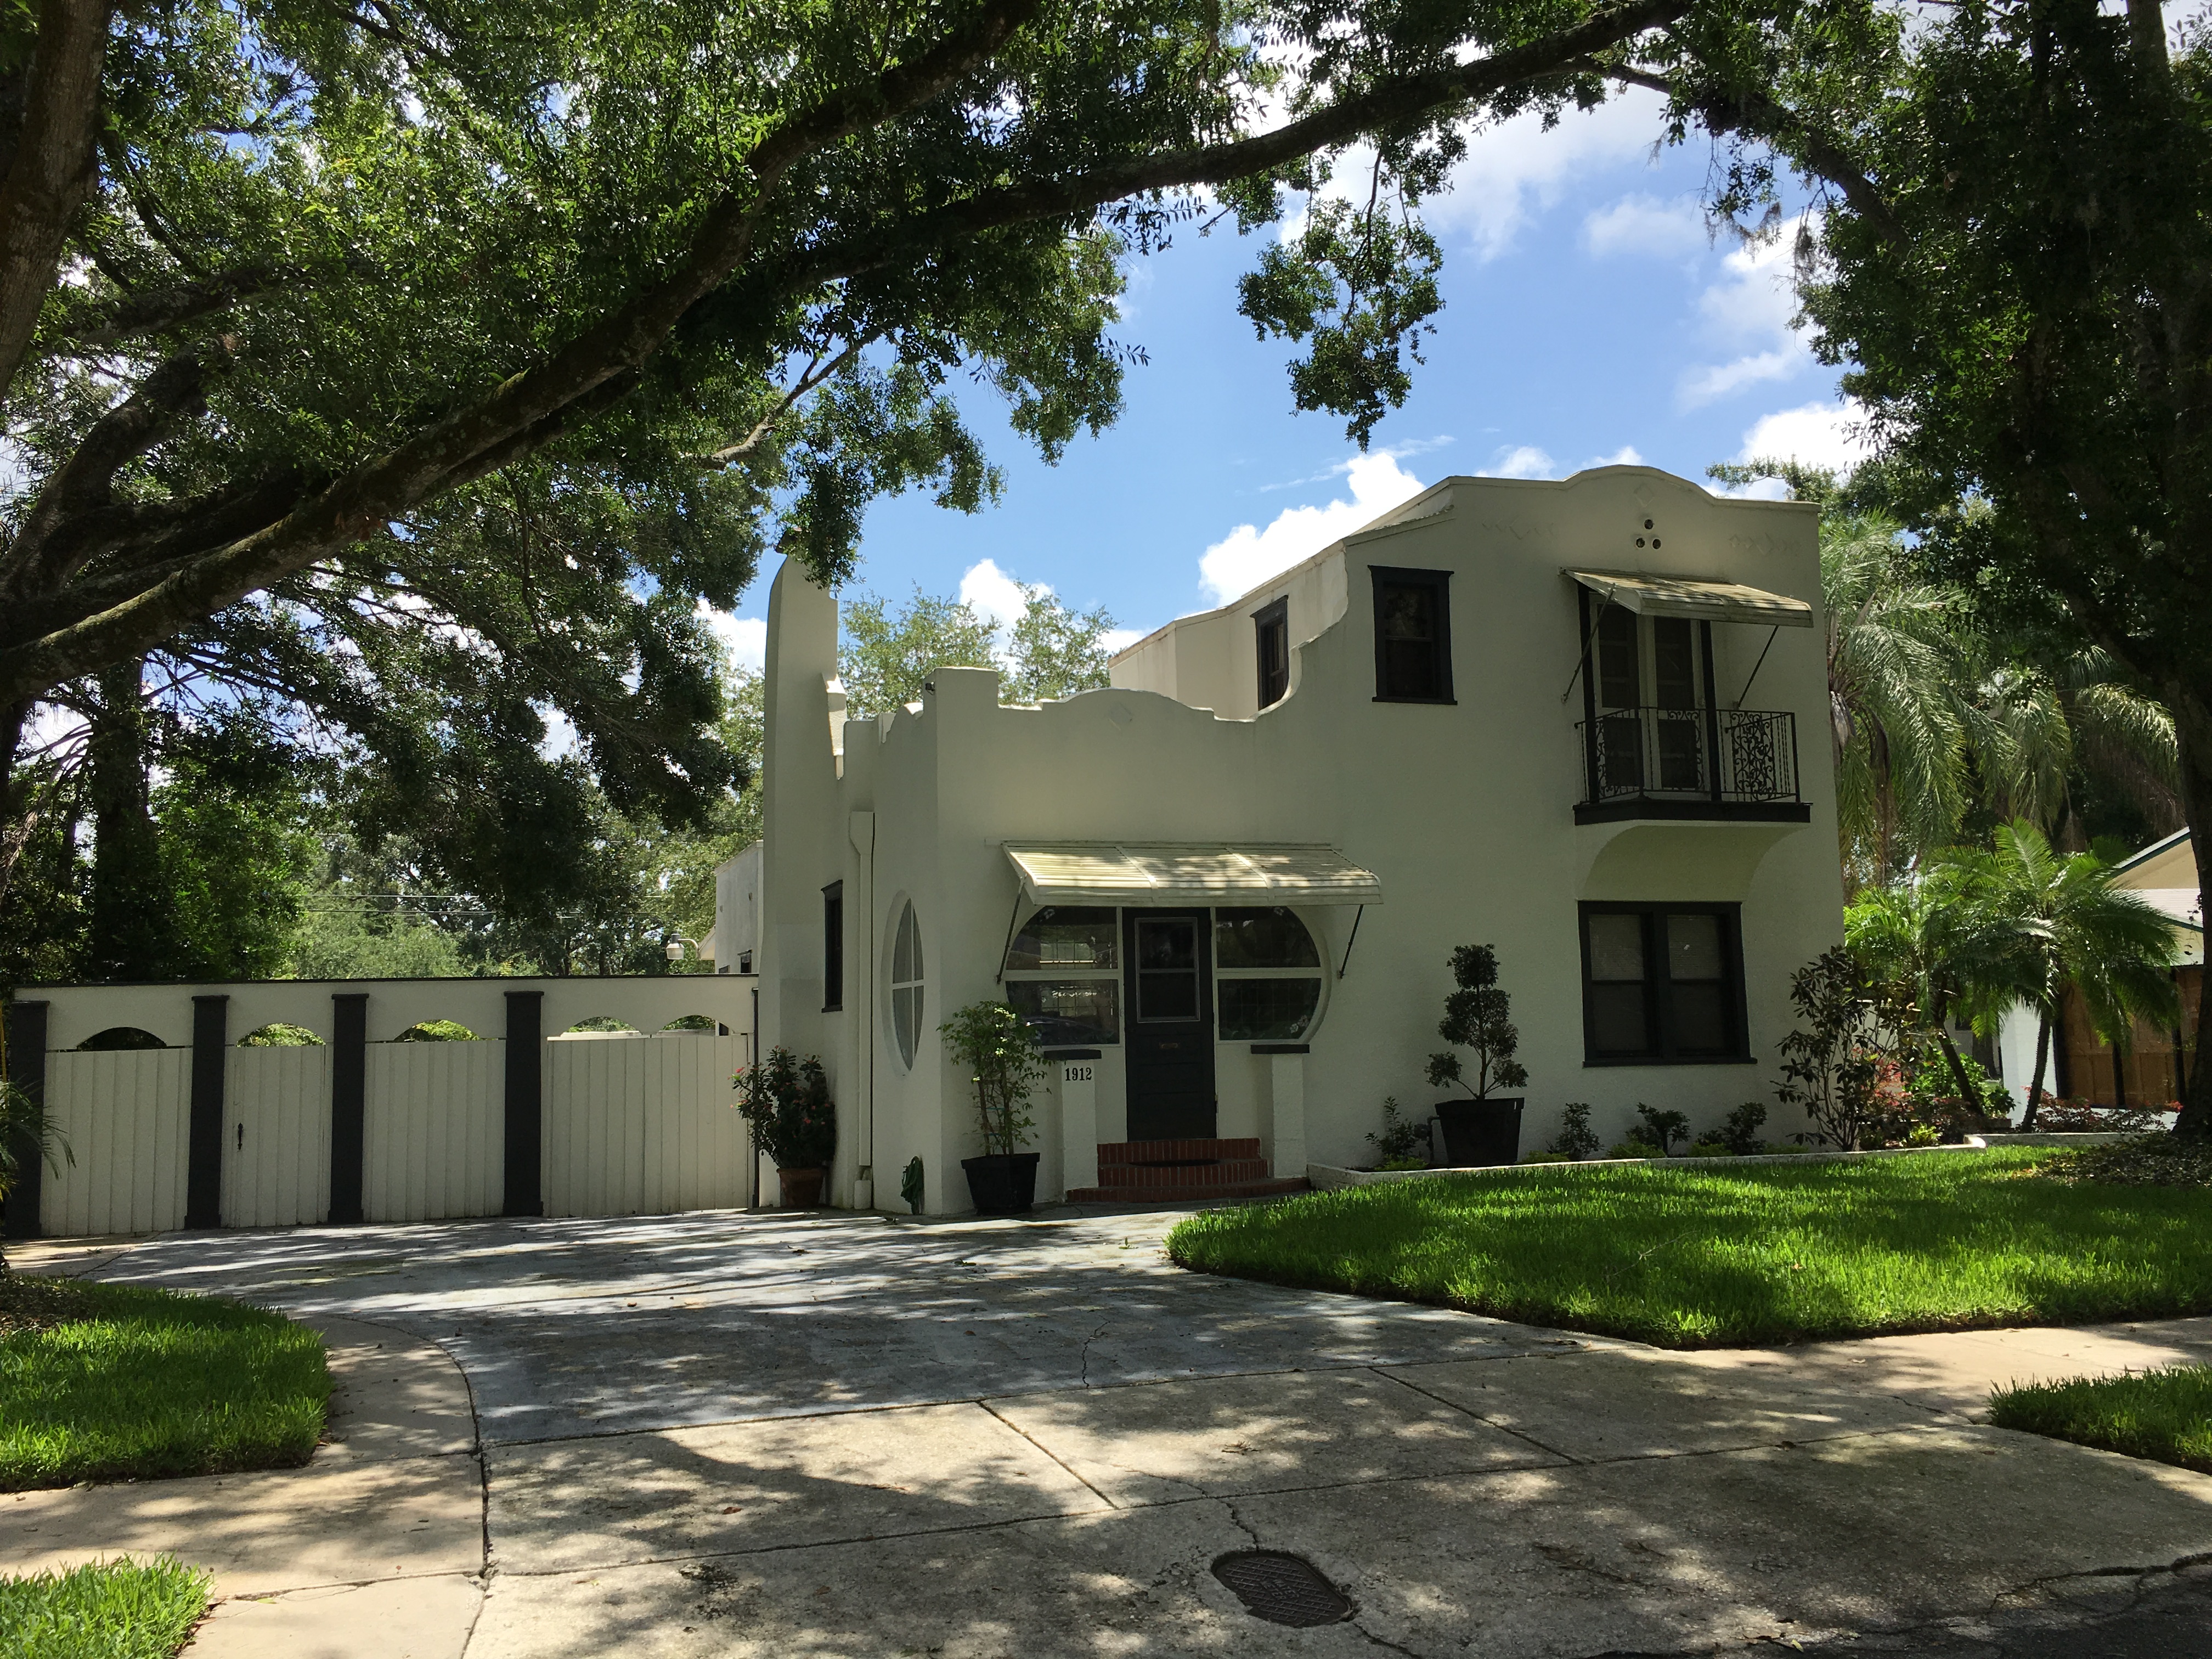 The neighborhood has a mix of one- and two-story residences, including this Spanish Colonial Revival home.